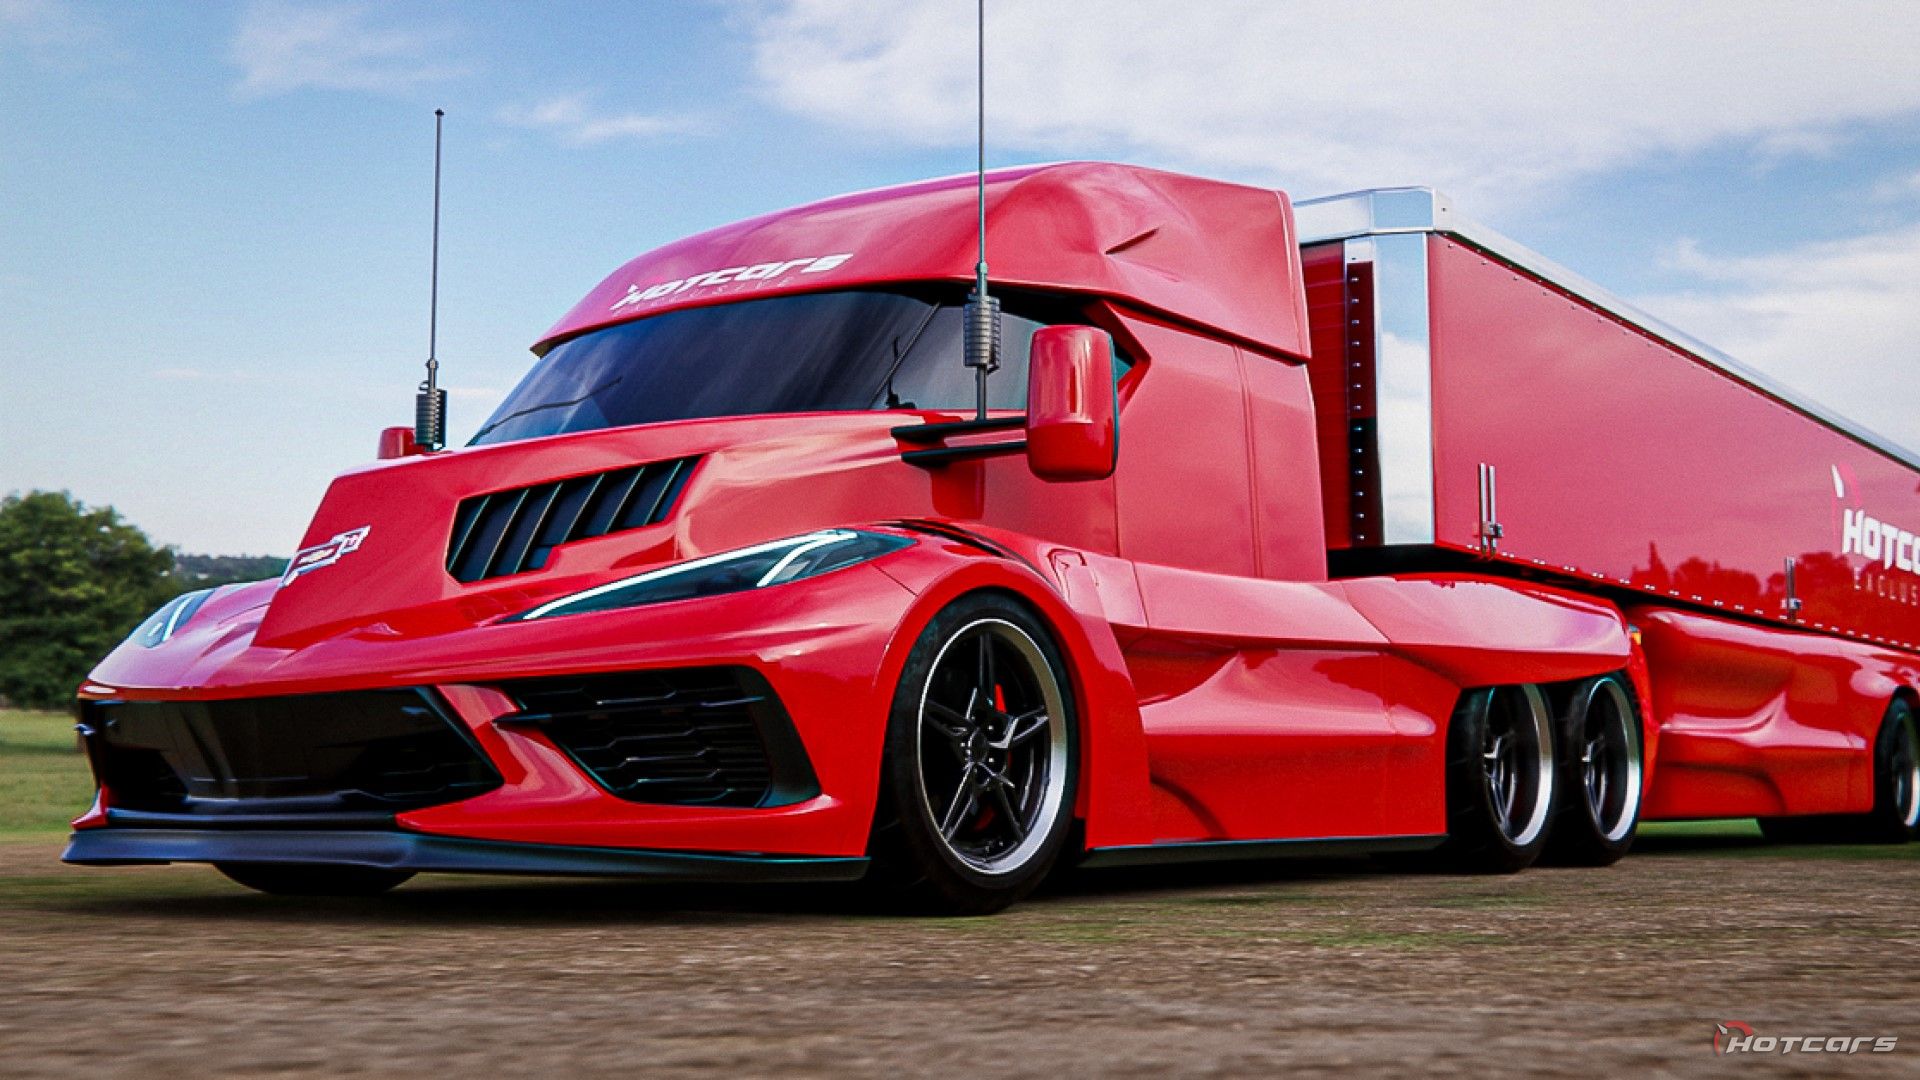 Our Chevrolet Corvette Semi-Truck Render Has A Great Feature You Won't See  On Any Kenworth